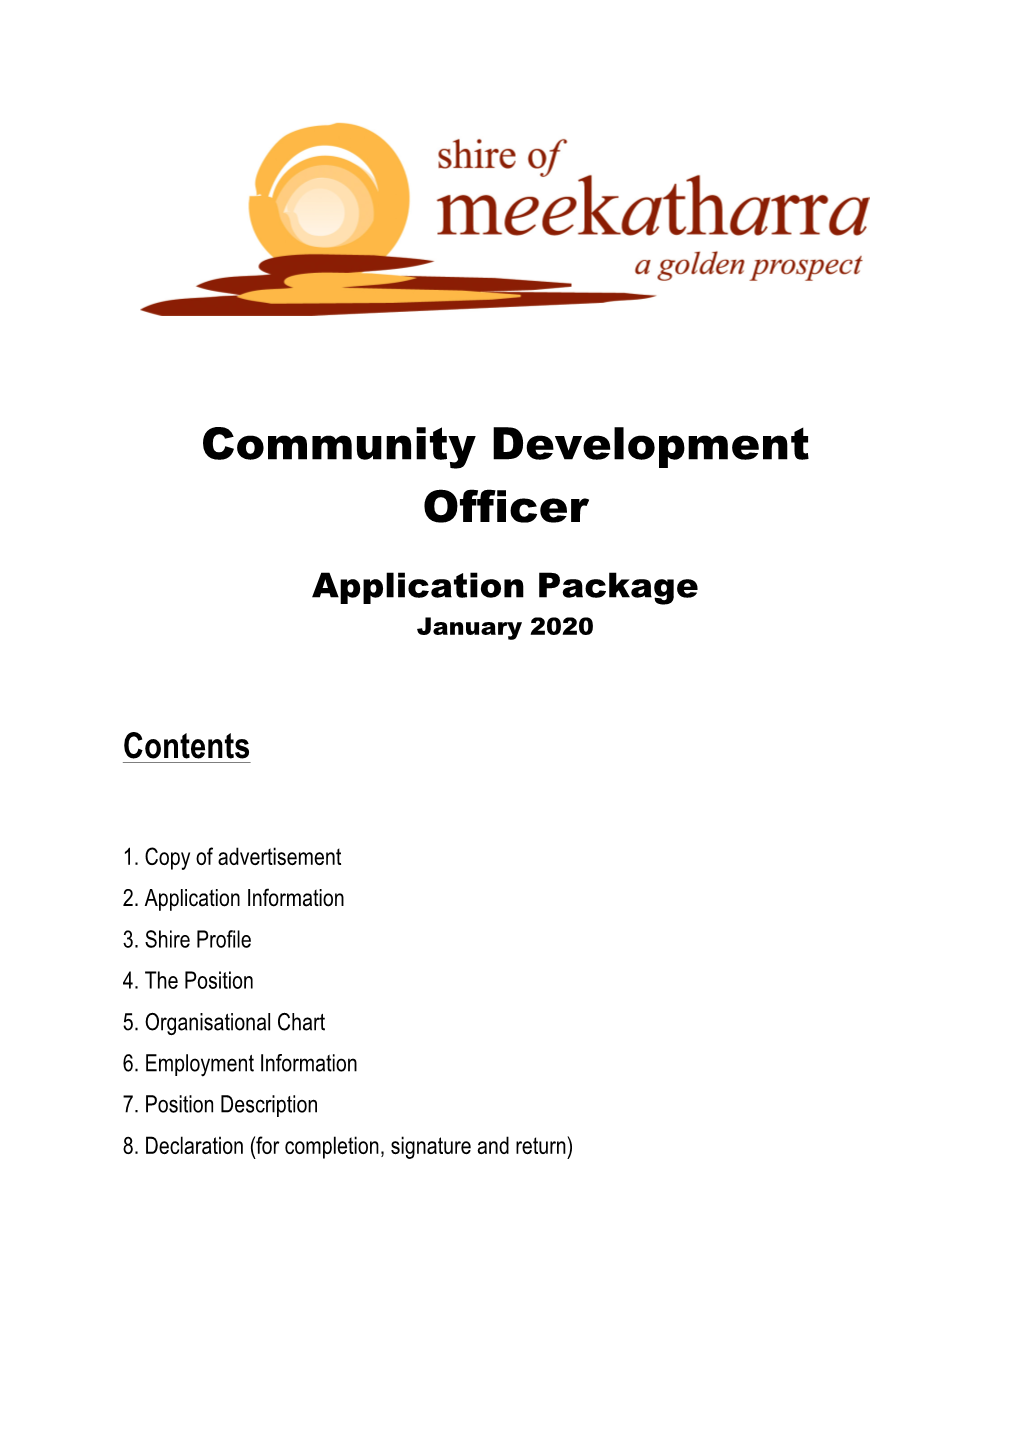 Shire of Meekatharra Has Responsibilities for Community Development, Events Coordination, Leisure and Recreation Services